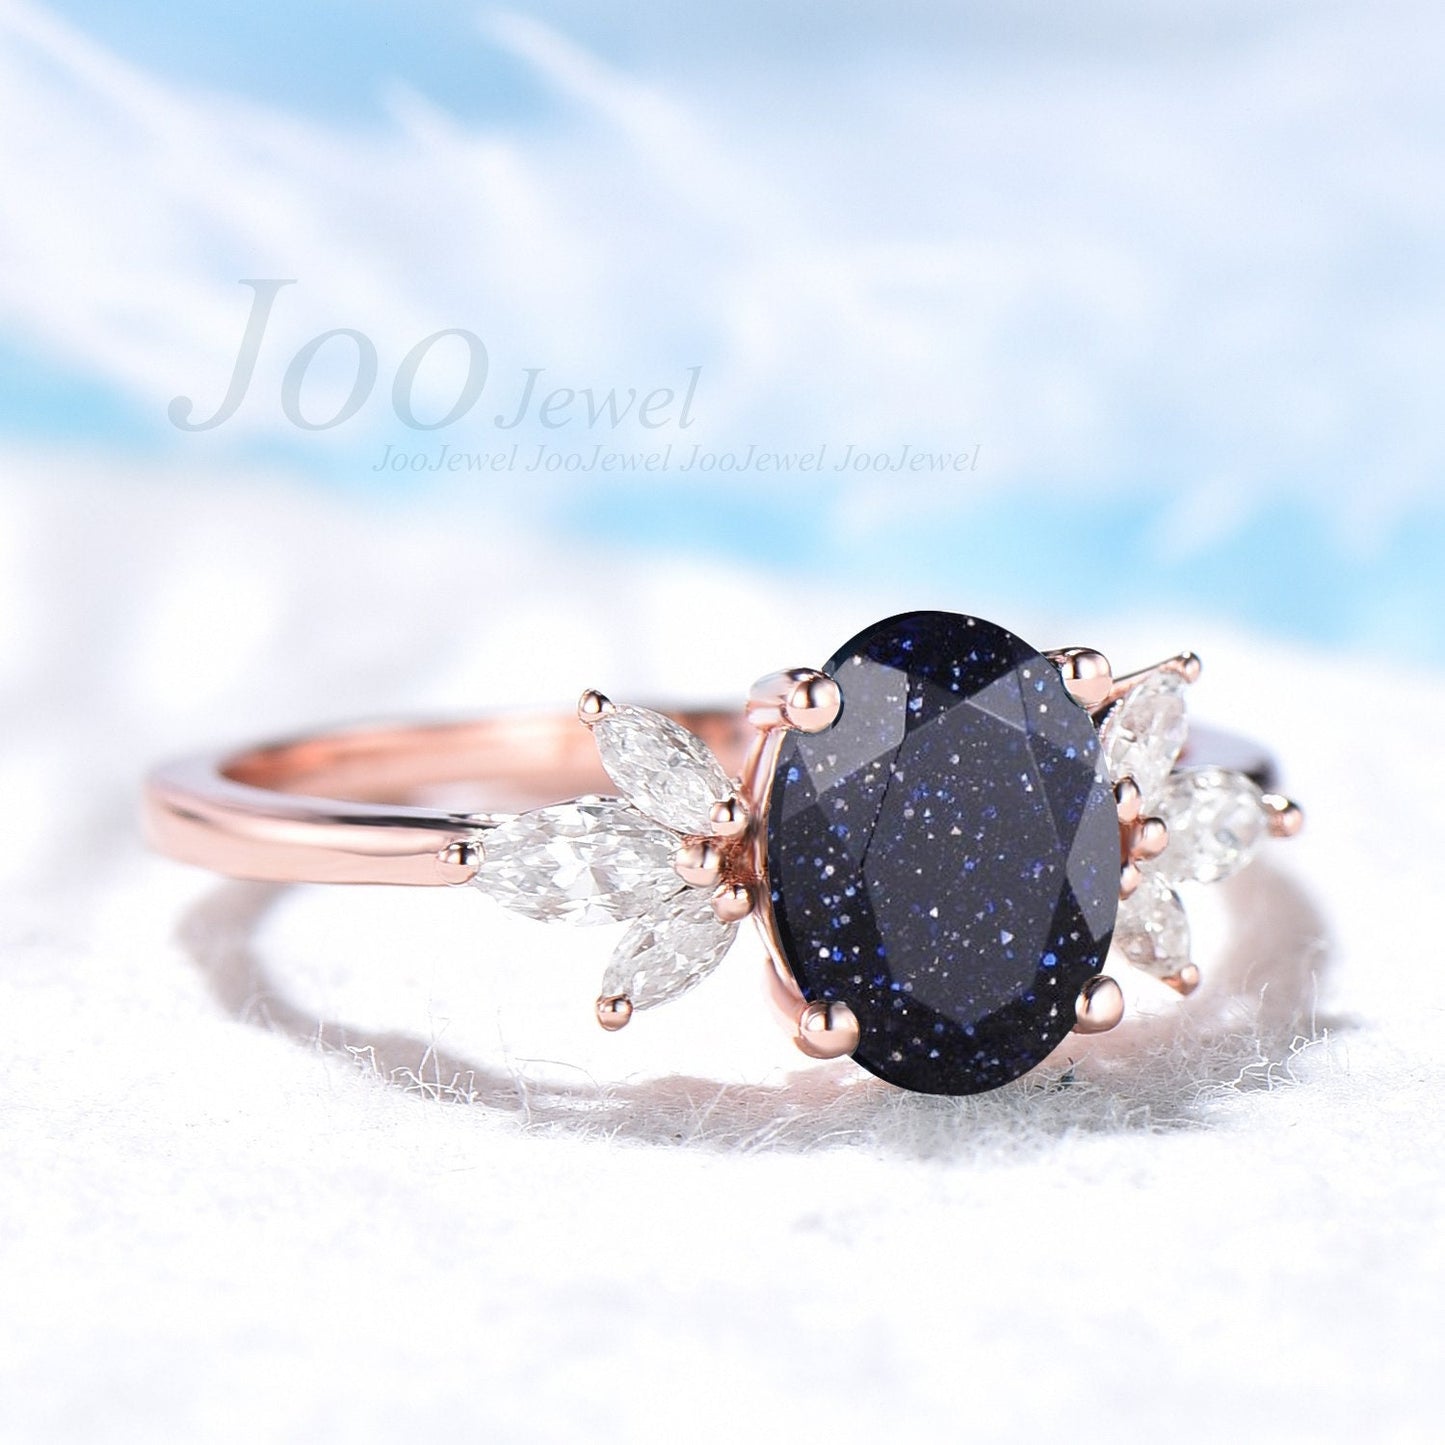 1.5ct Oval Blue Sandstone Ring Galax Gemstone Ring Energy Healing Crystal Jewelry Blue Goldstone Engagement Ring Women Cluster Ring Vintage